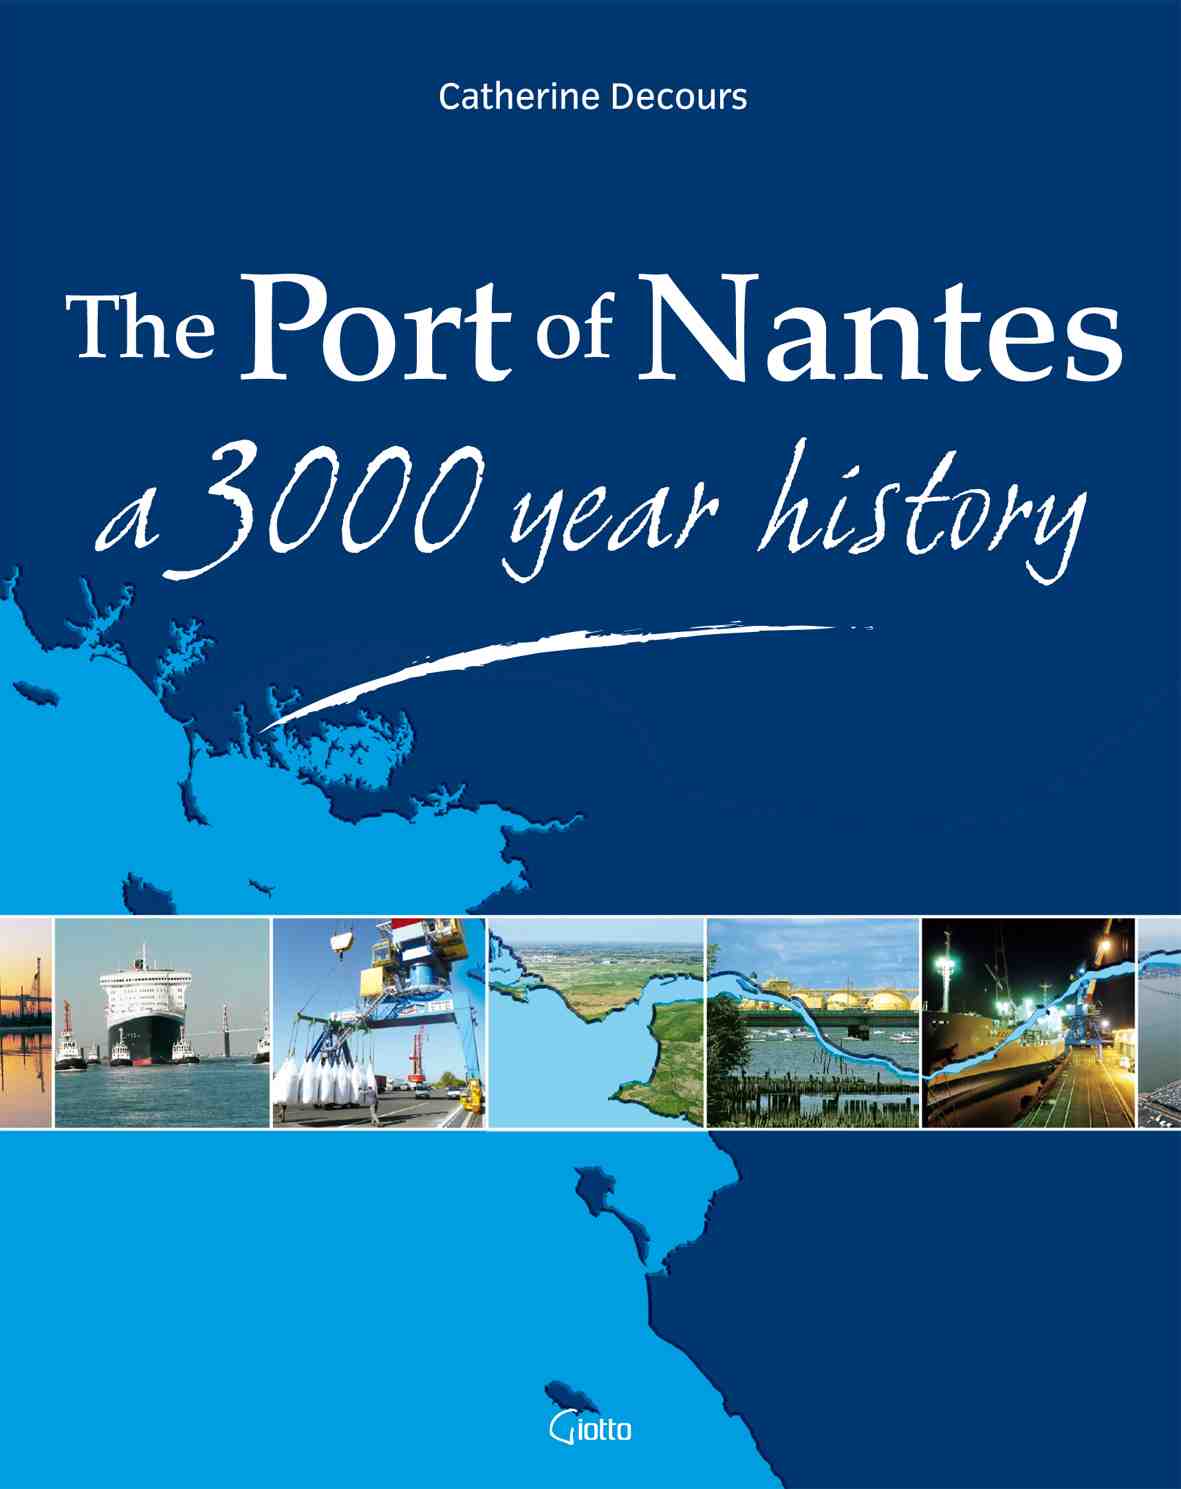 The port of Nantes, a 3000 year history, 2006, 116 p., ill. coul.